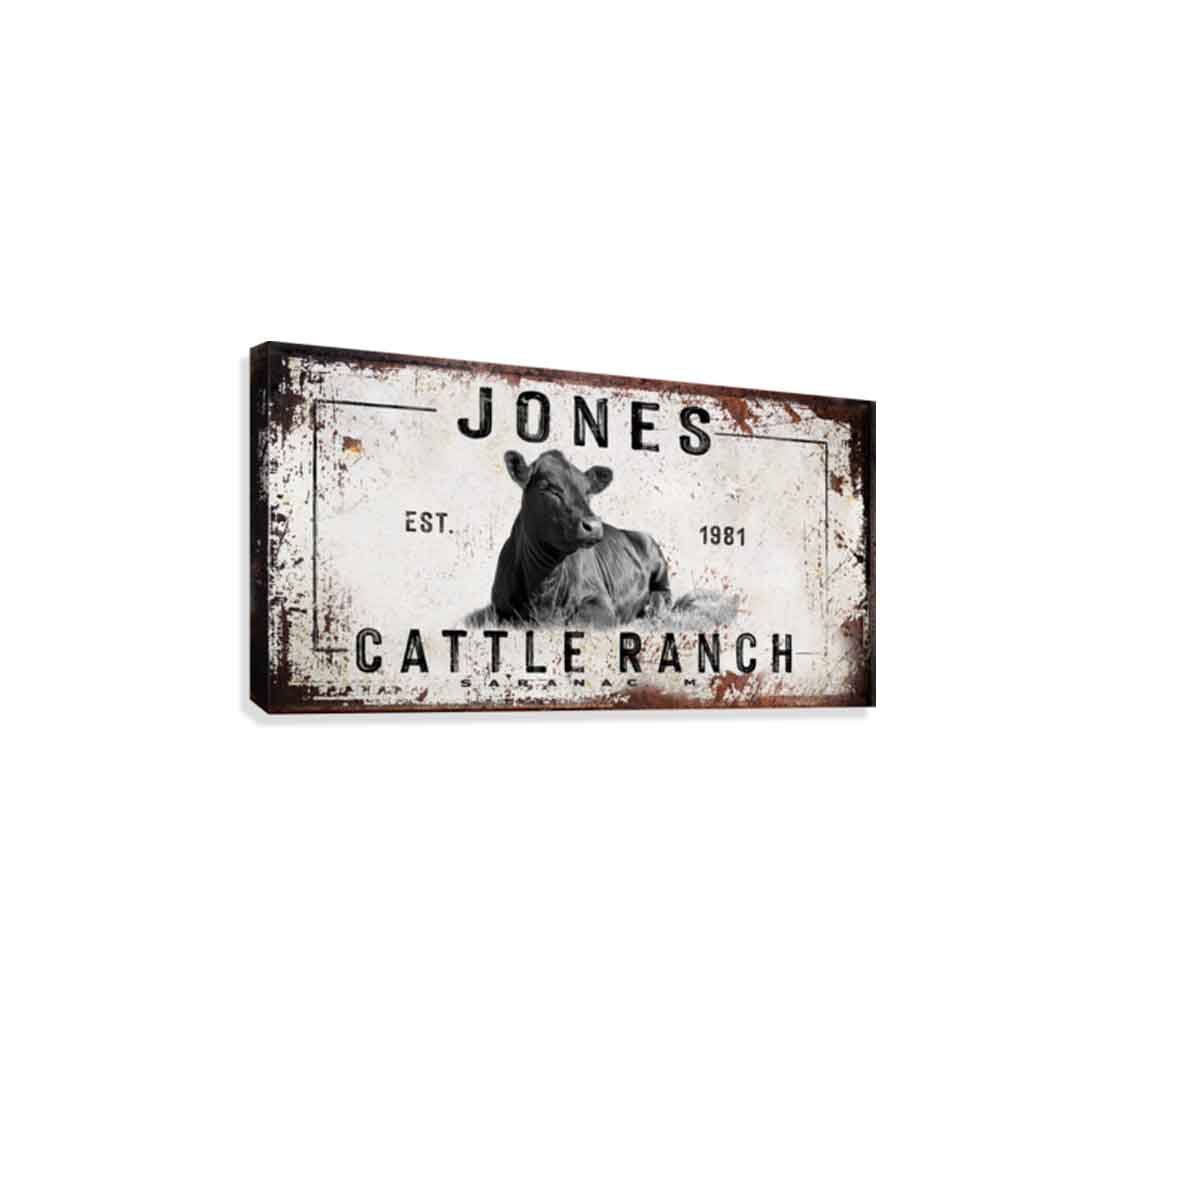 Personalized cattle ranch Cow Sign with rustic distressed frame with rusty edges. Cow and year established [Family Name] Cattle Ranch